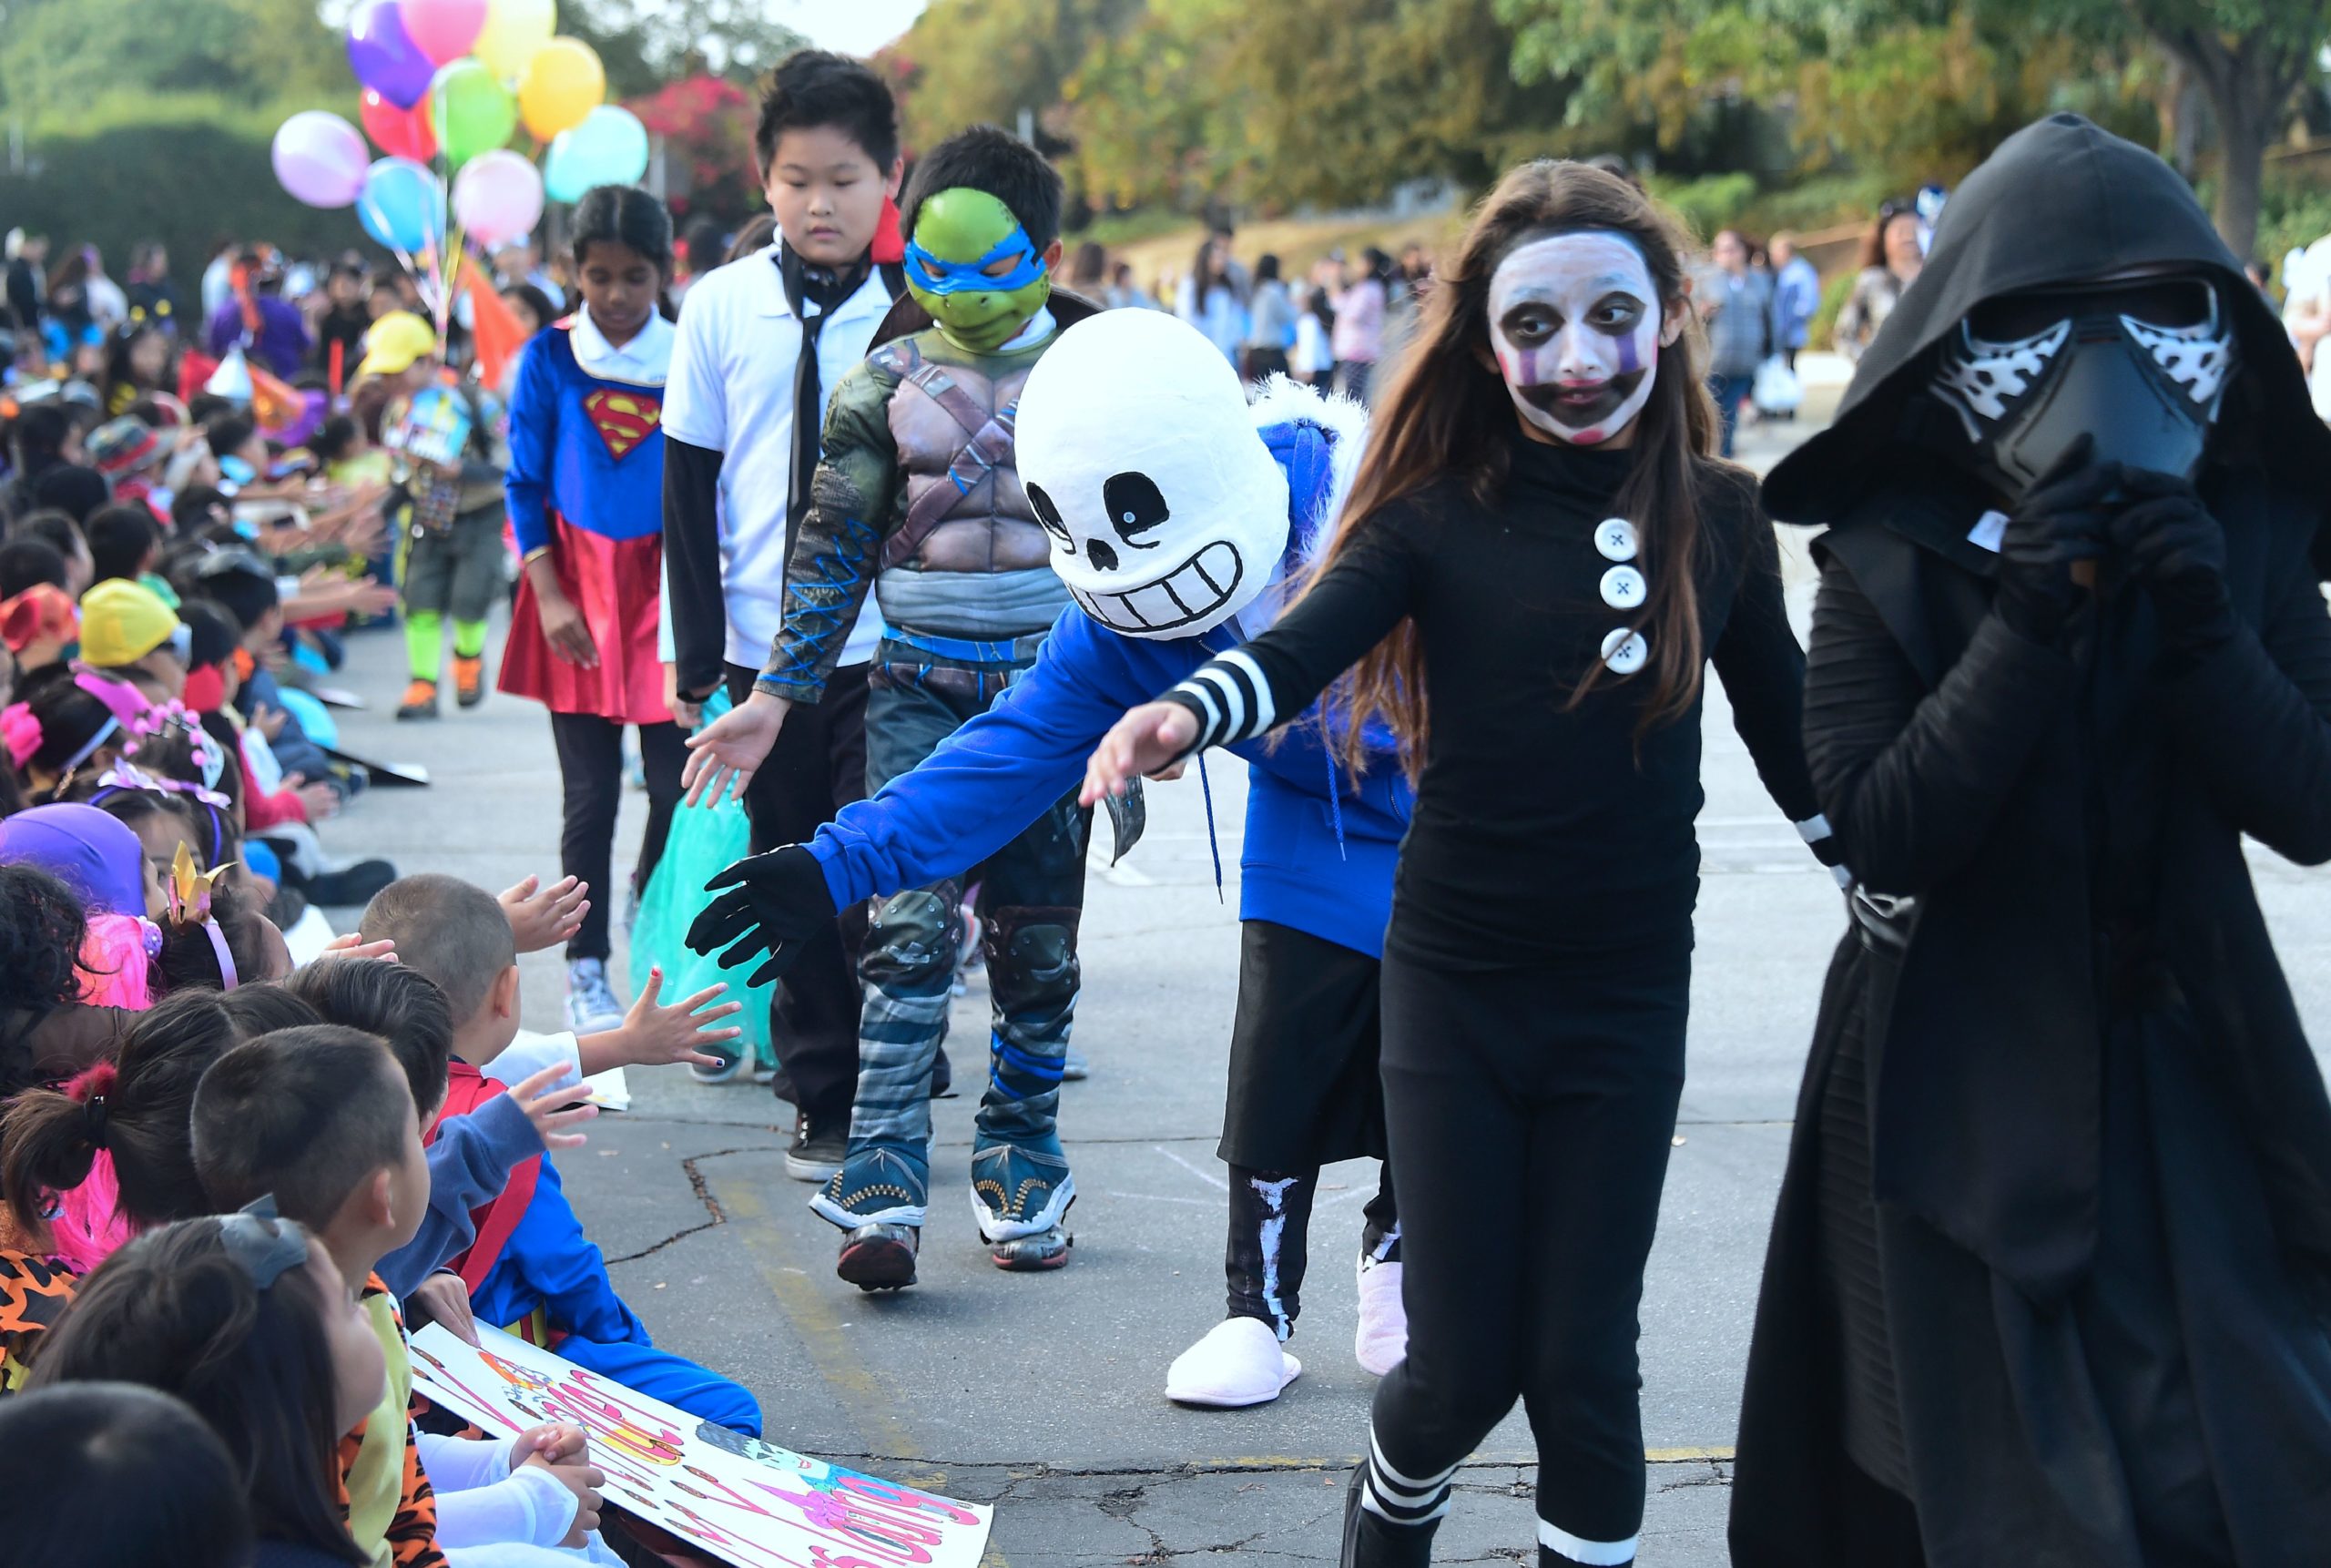 Schoolchildren take part in a morning Halloween parade dressed in their costumes to celebrate Halloween on October 31, 2016 in Monterey Park, California. (Photo by FREDERIC J. BROWN/AFP via Getty Images)